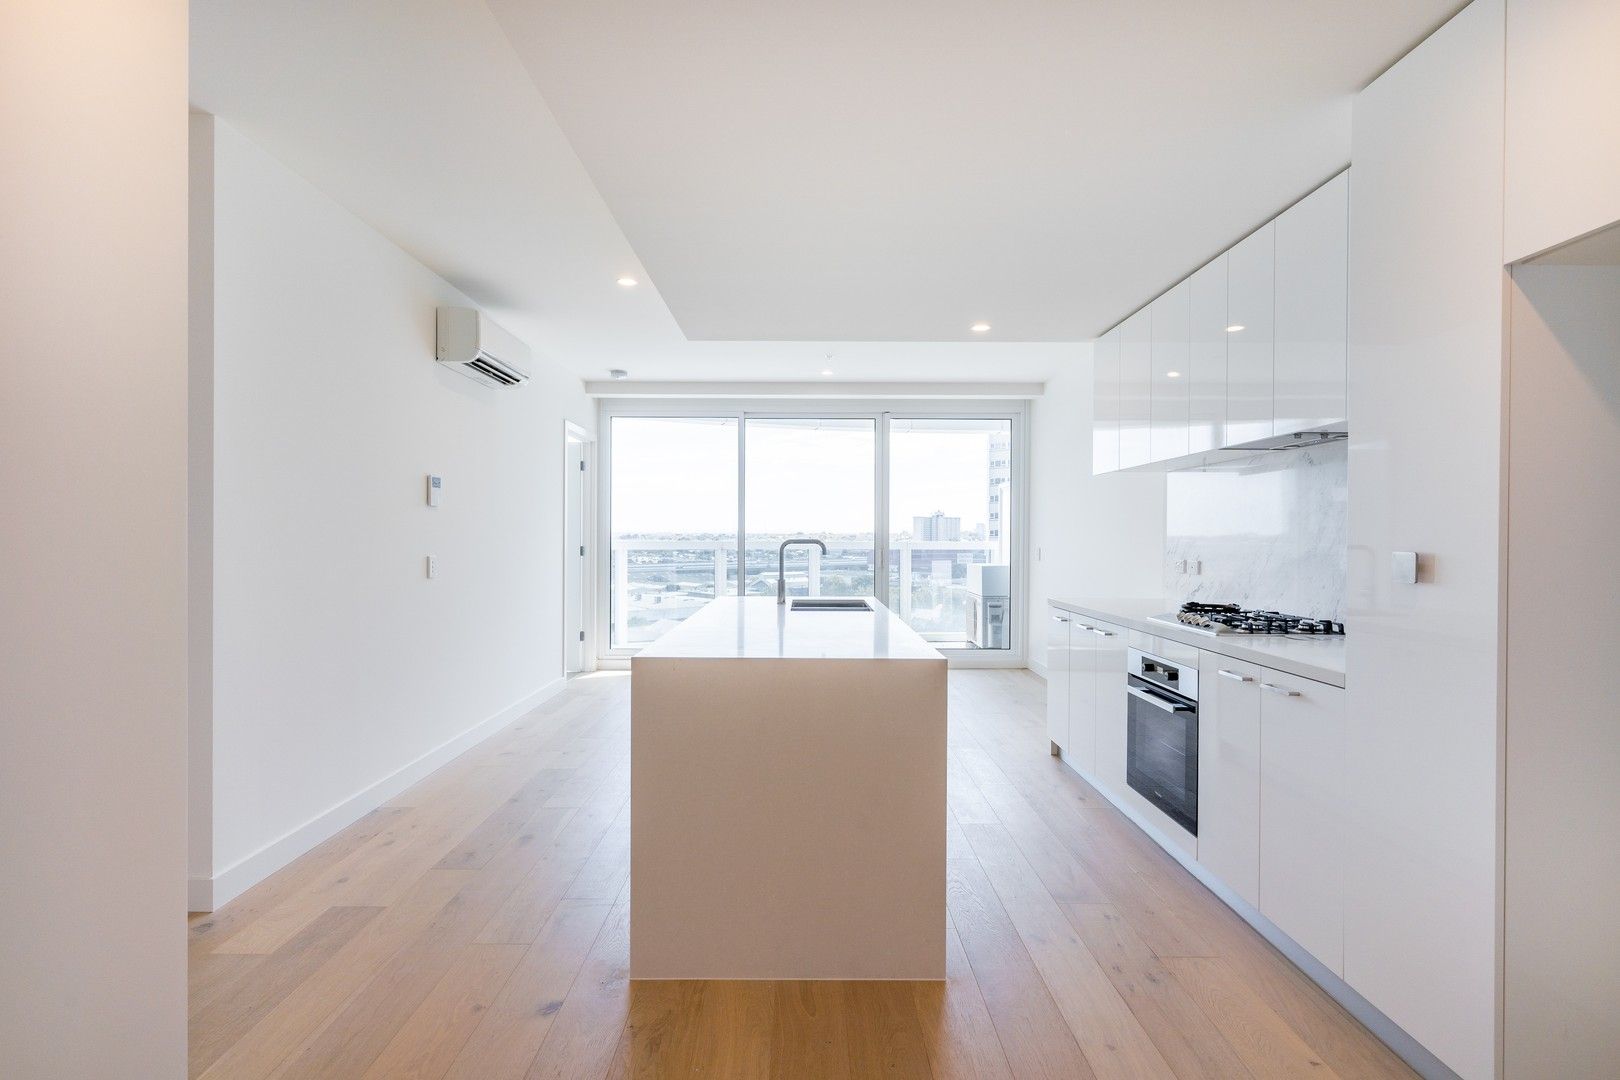 2 bedrooms Apartment / Unit / Flat in 907/111 Canning St NORTH MELBOURNE VIC, 3051